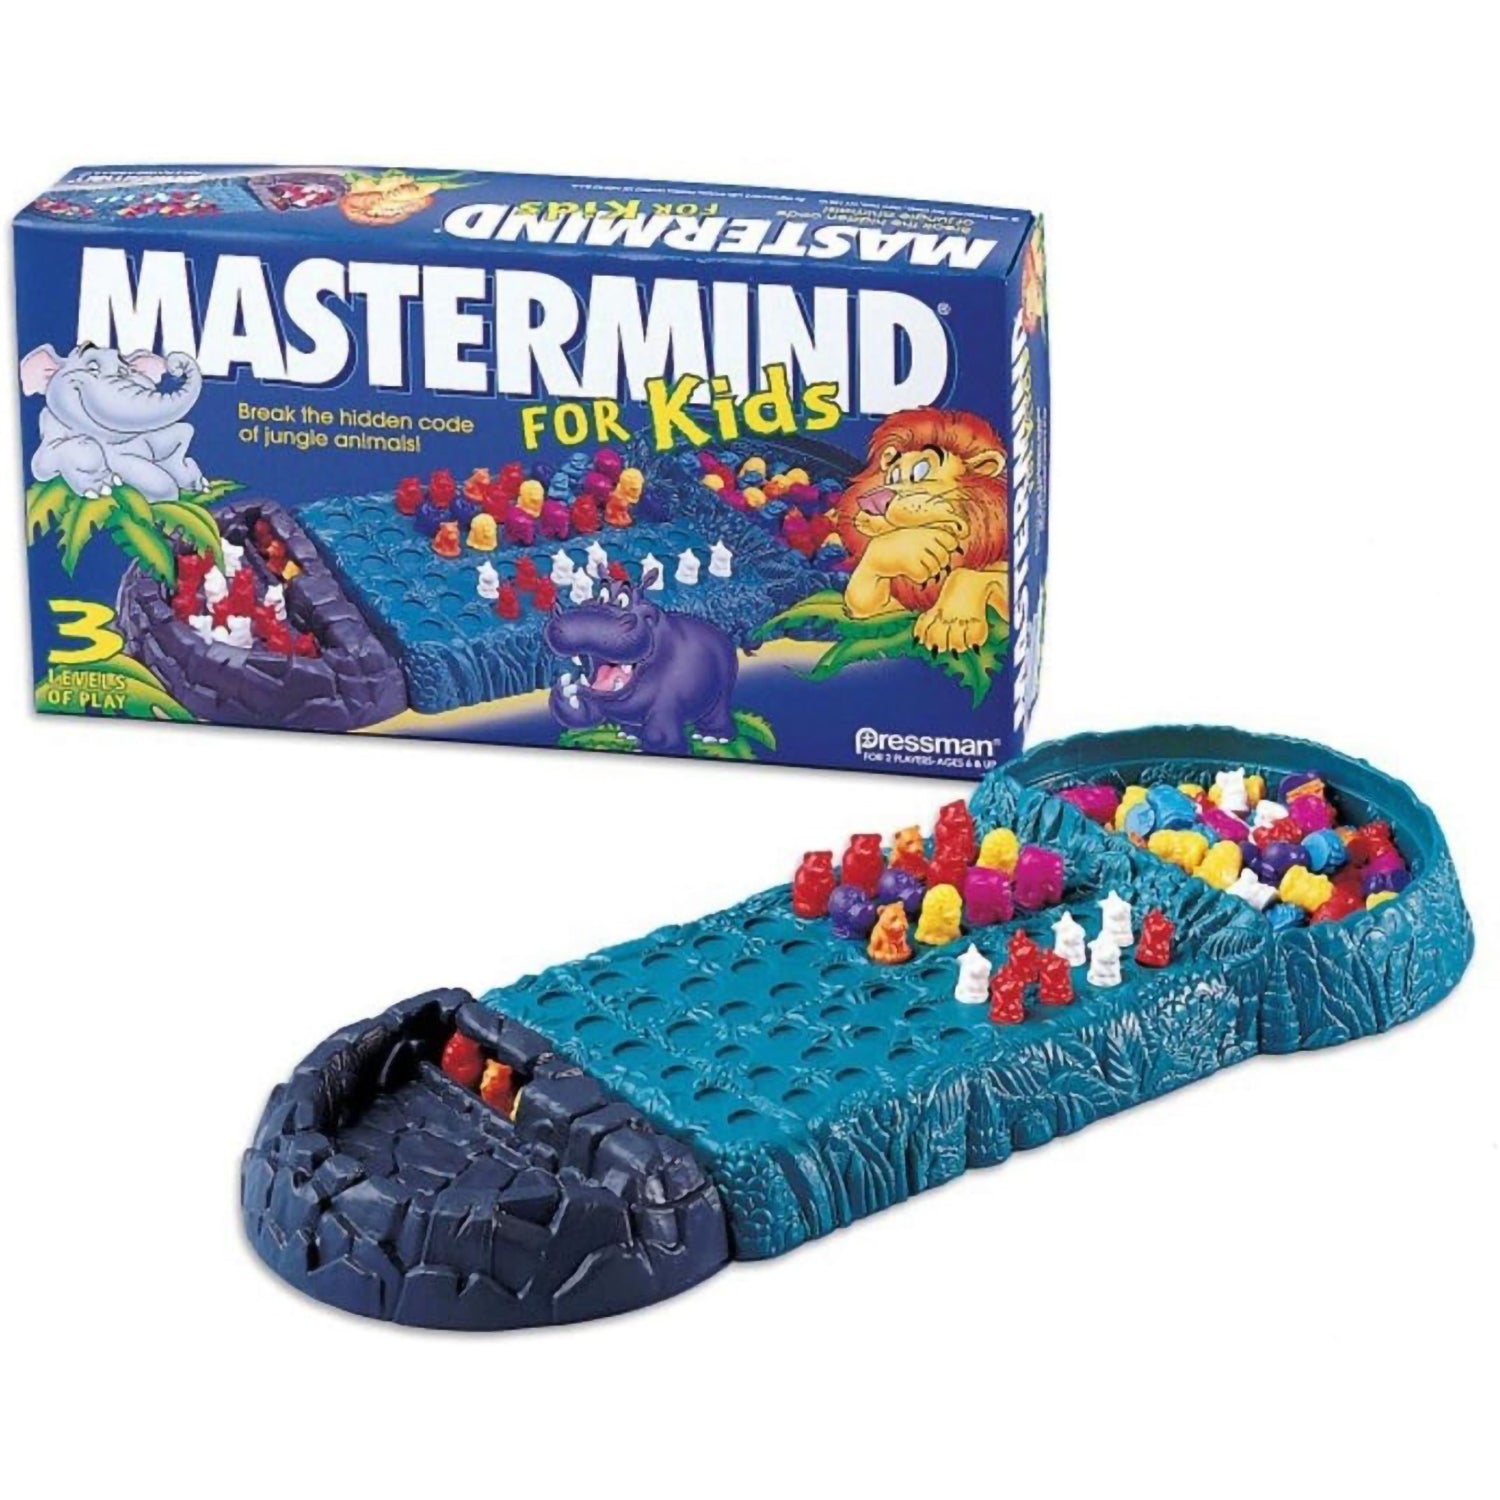 Mastermind for Kids Board Game